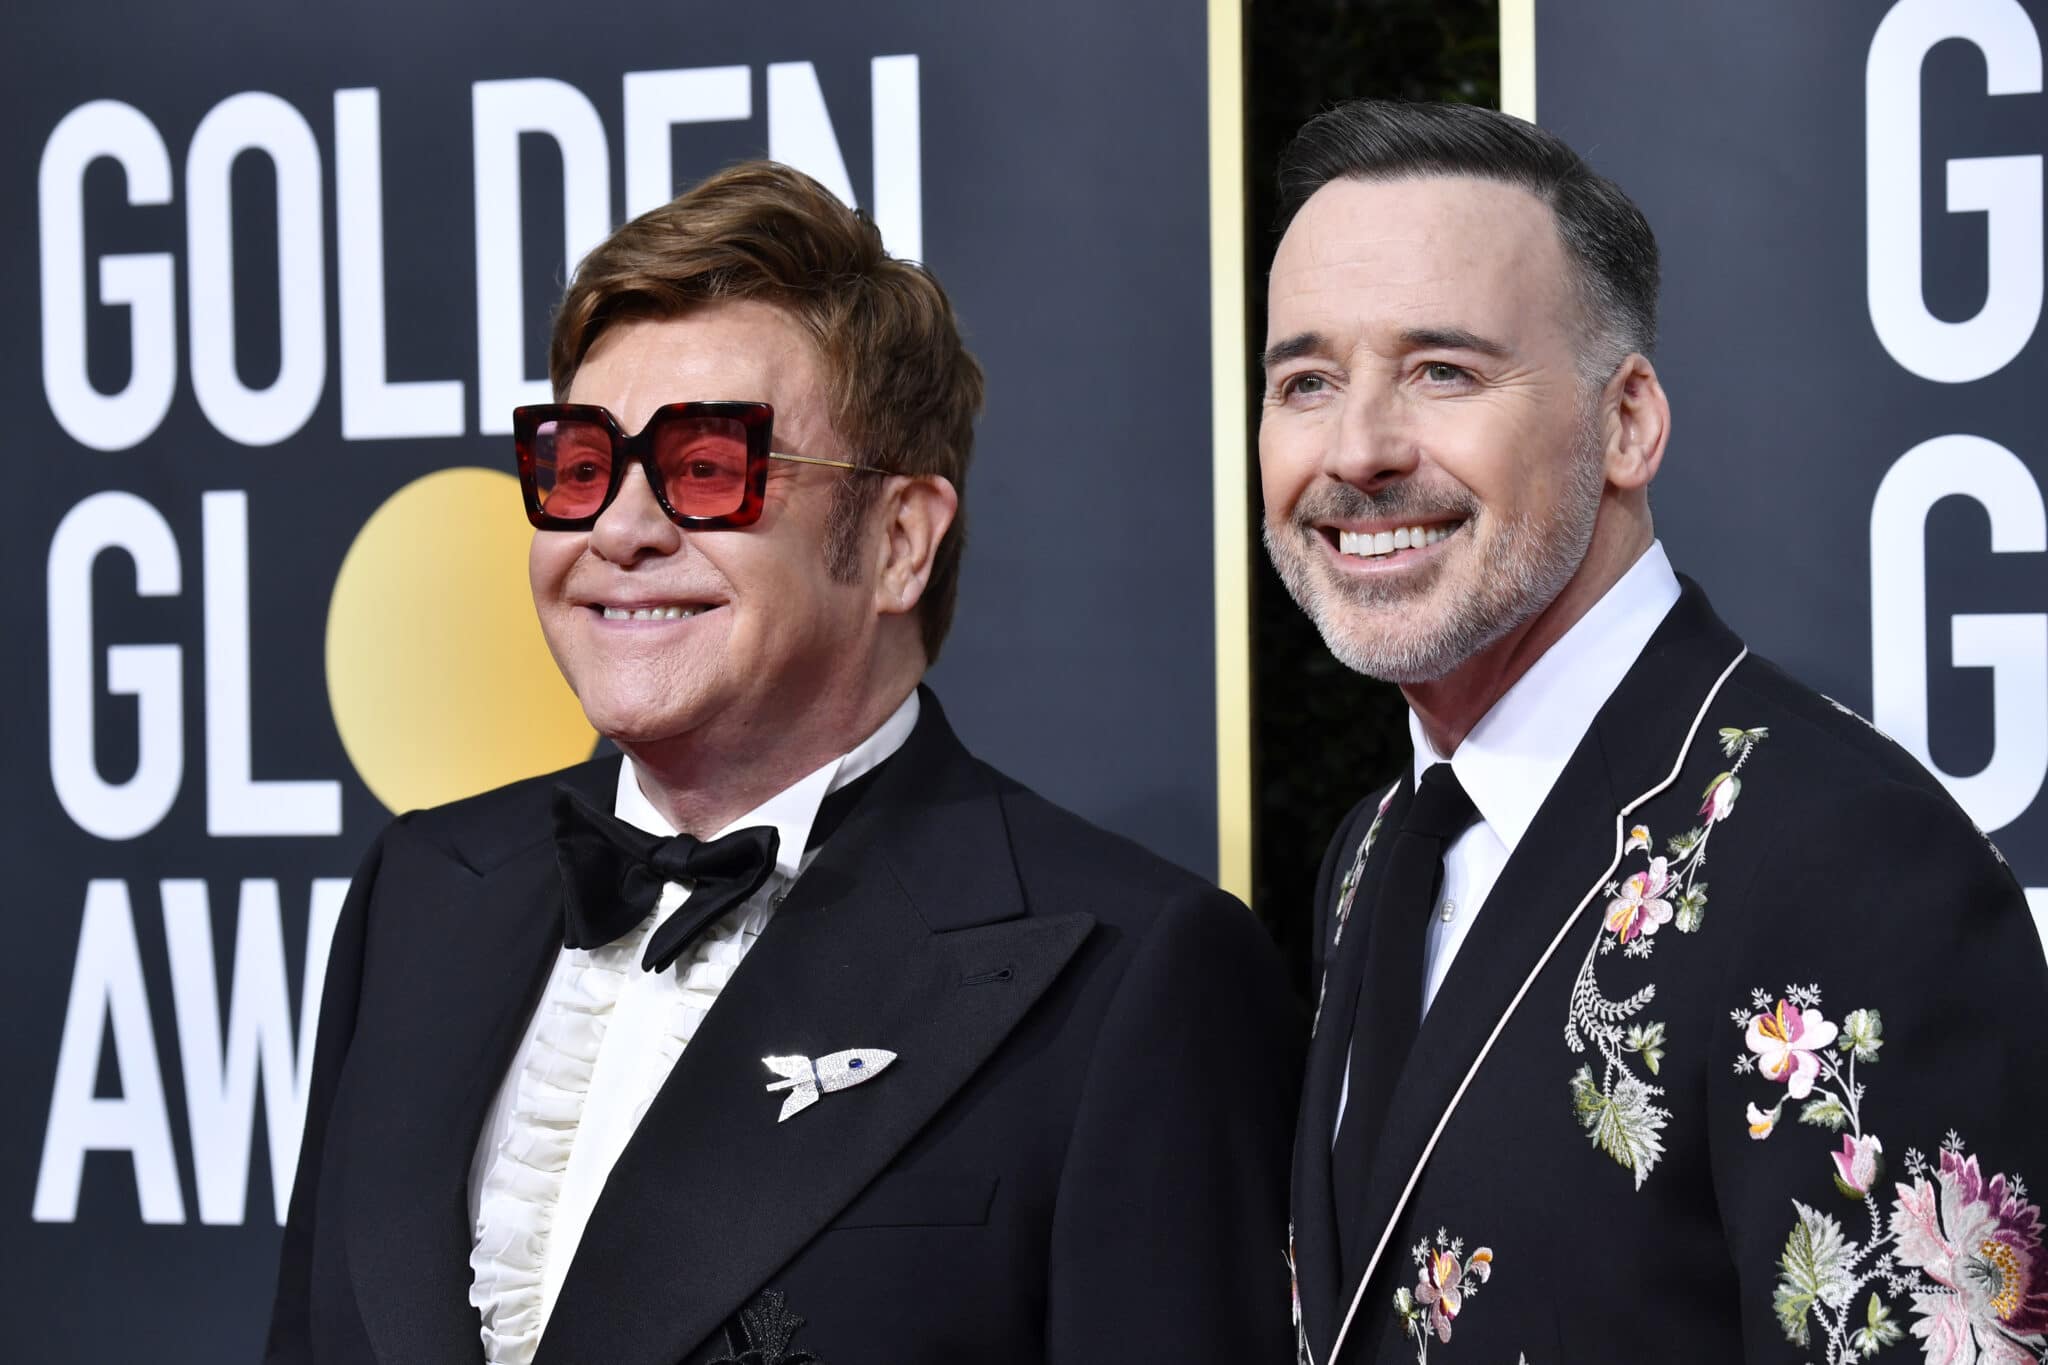 Elton John was turned down from adopting orphan in 2009 for being gay